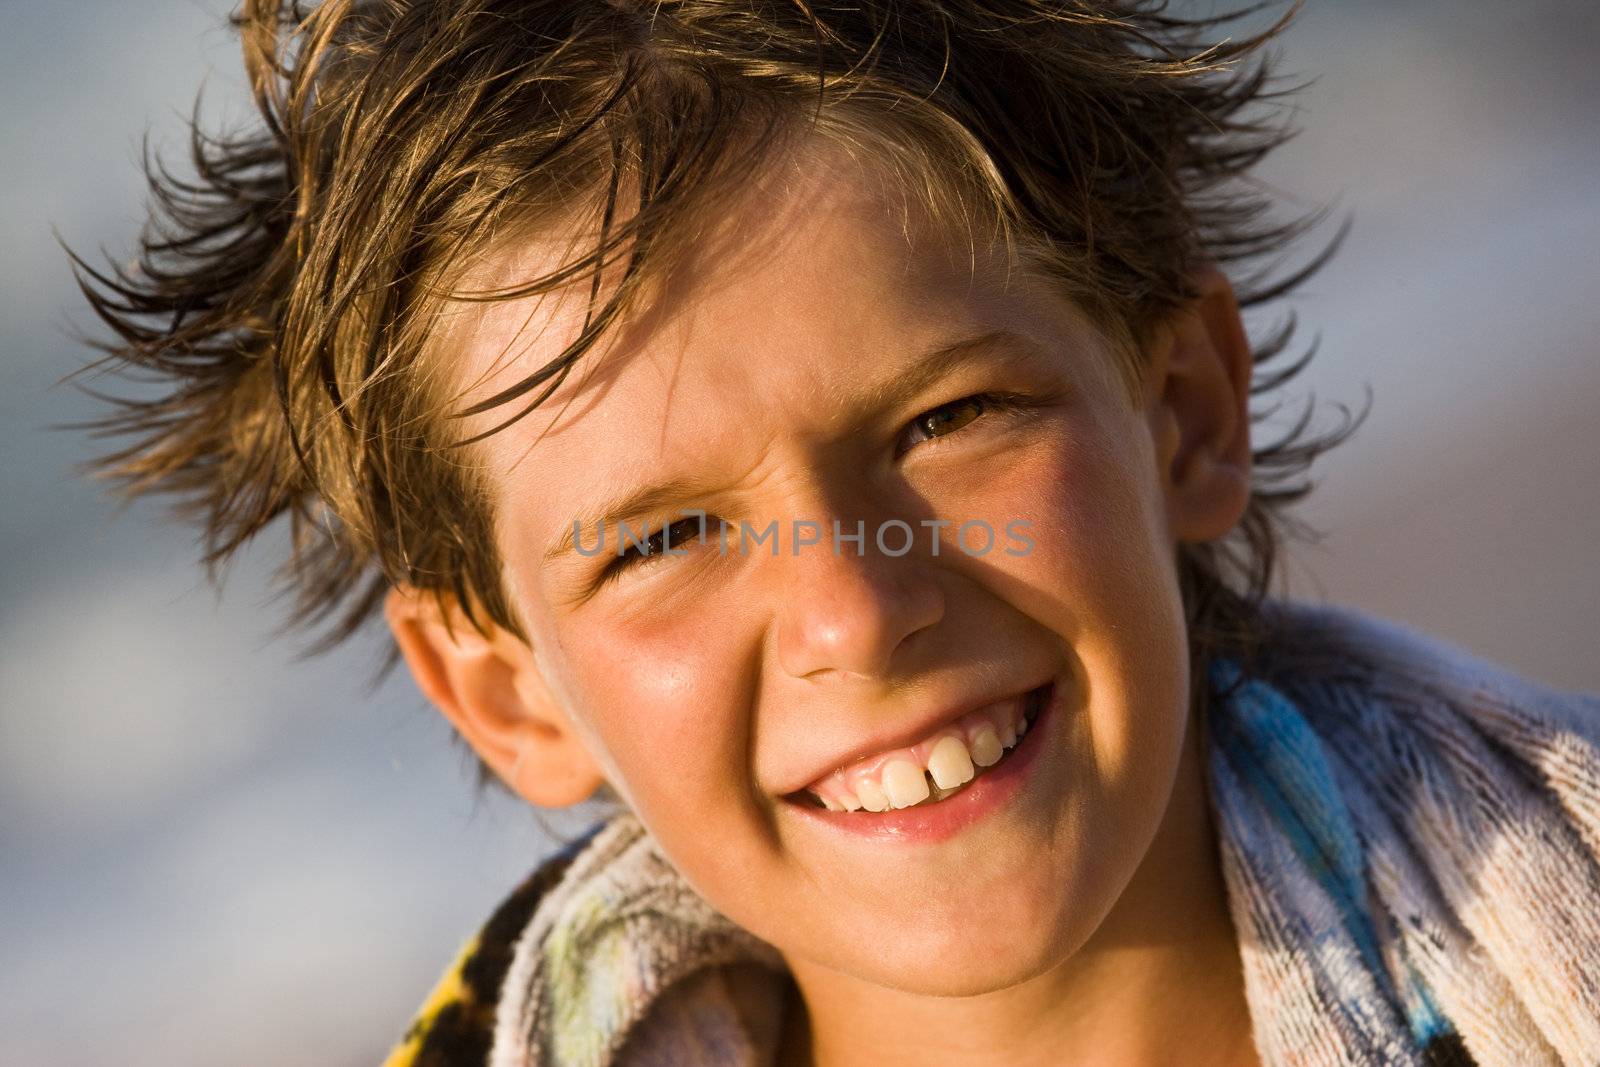 Smiling boy by agg